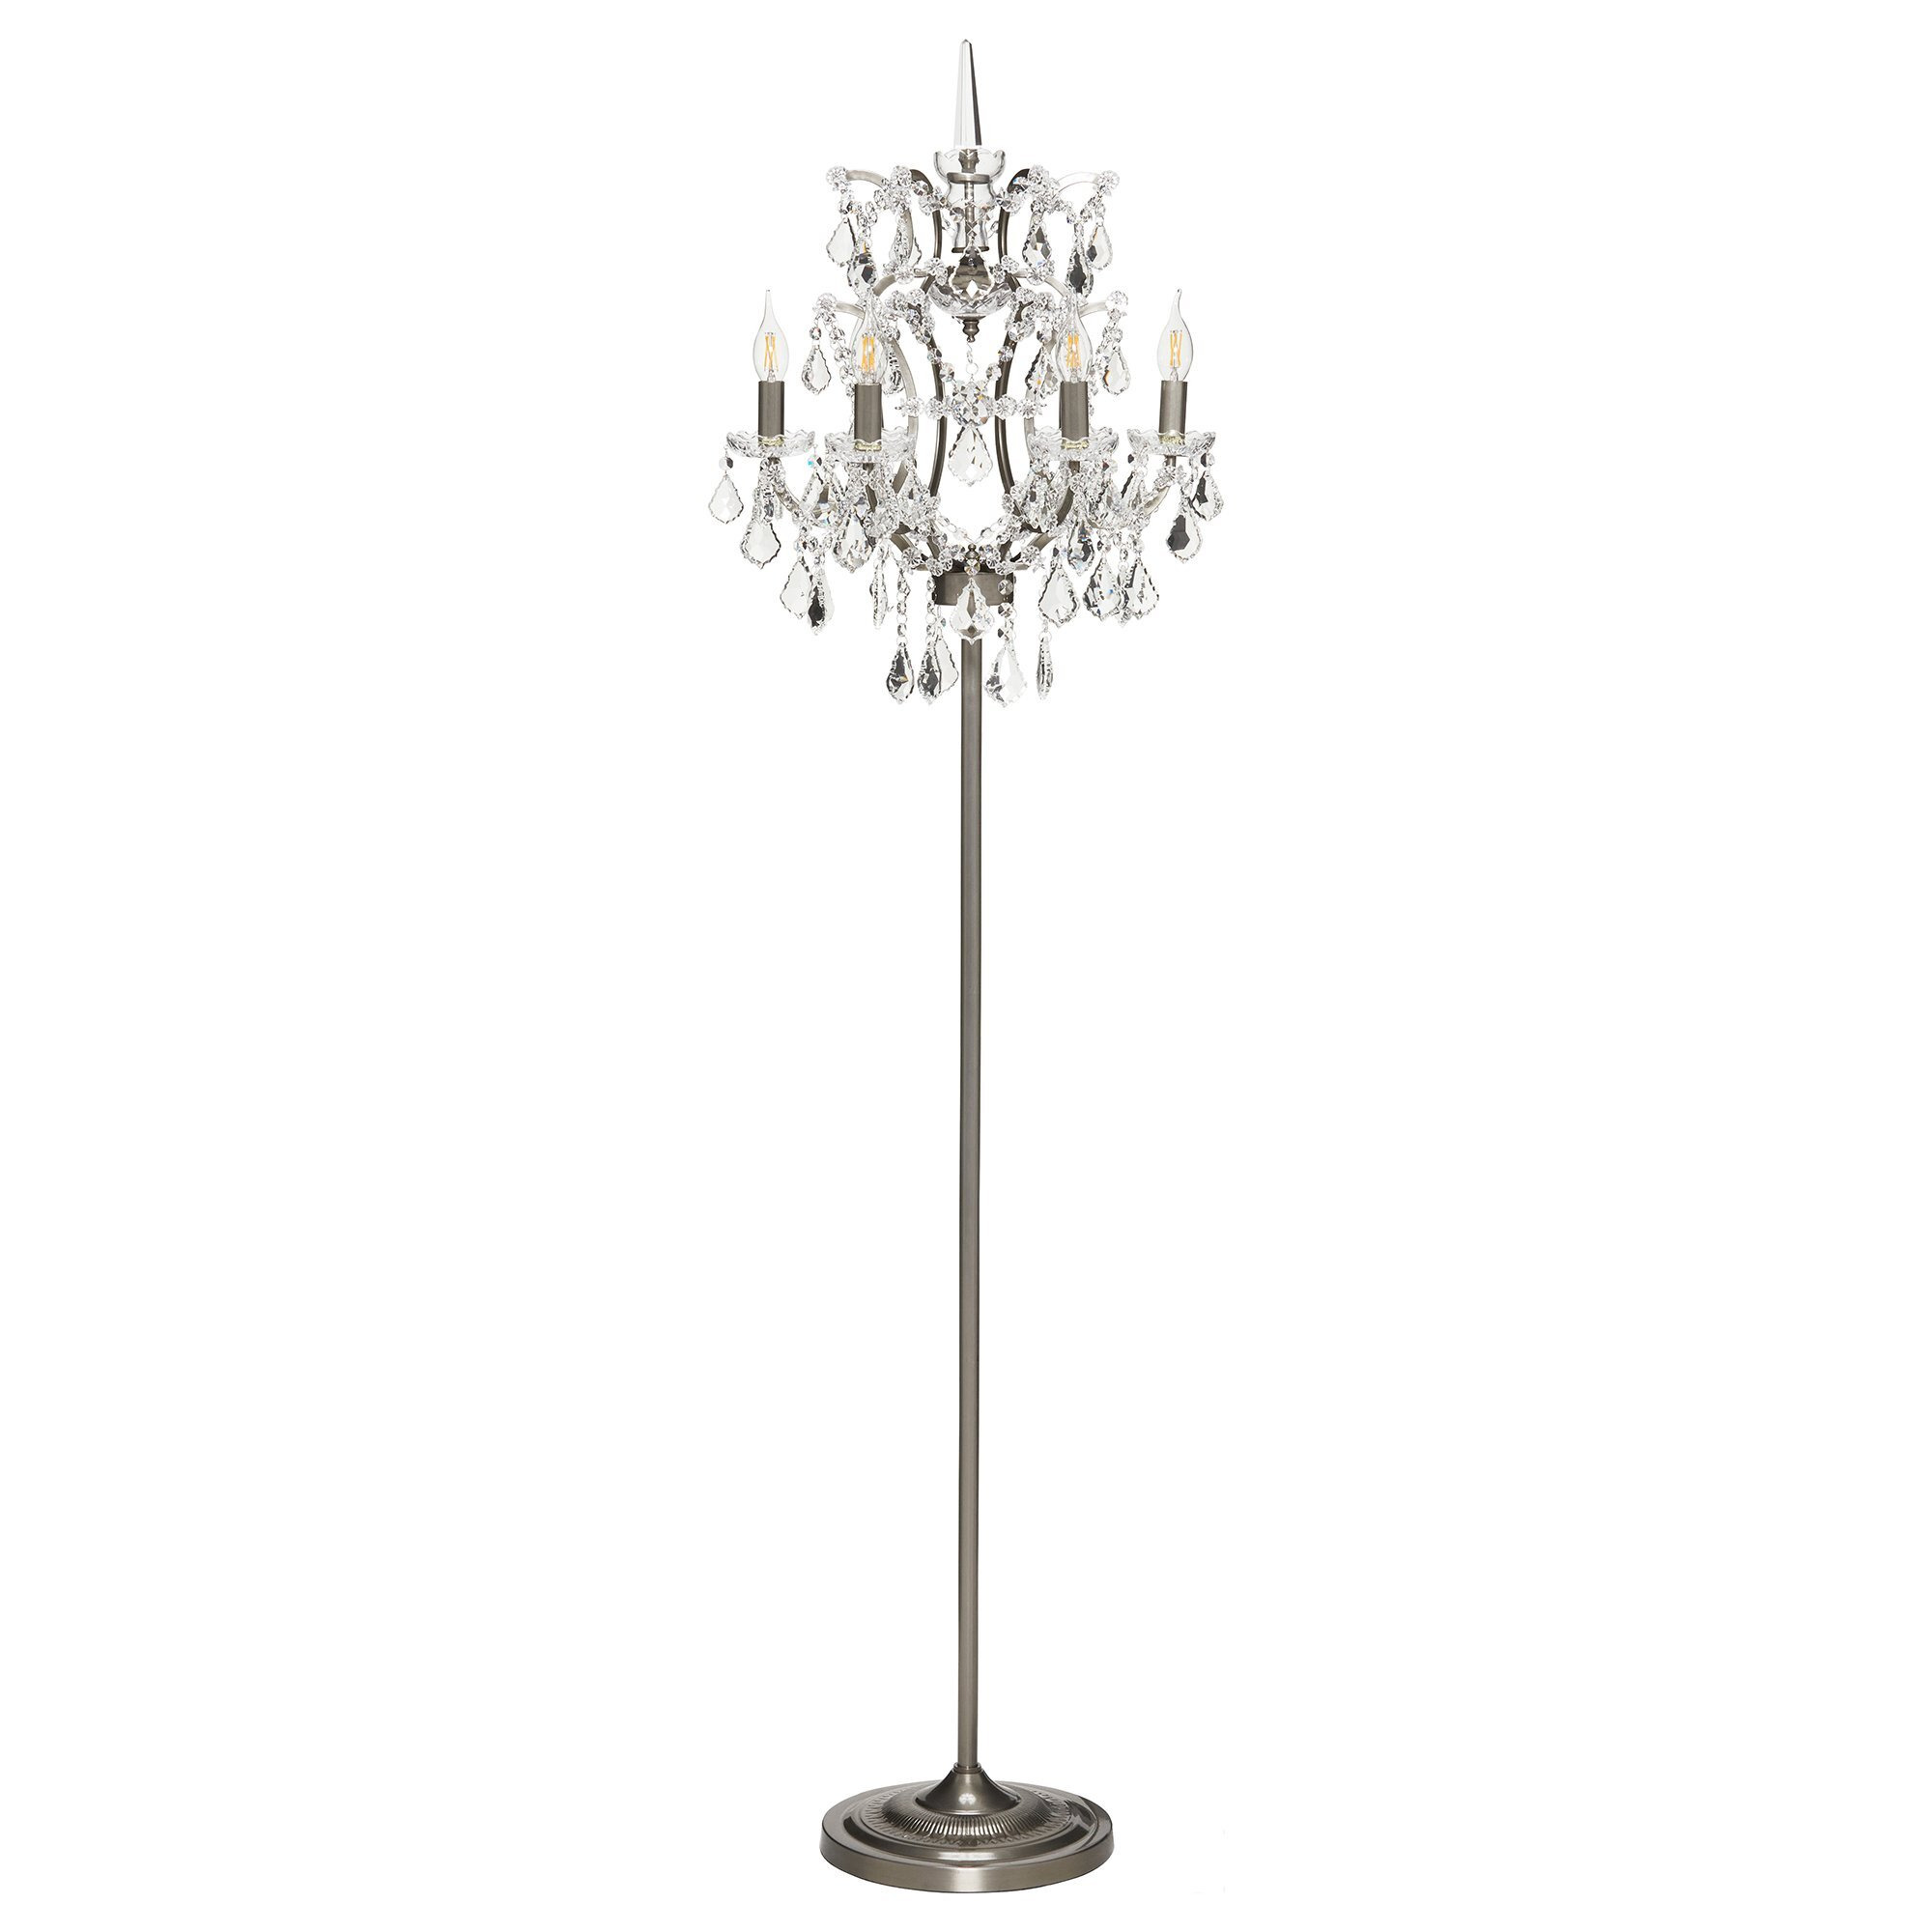 Timothy Oulton Crystal Floor Lamp, Neutral Metal - Barker & Stonehouse - image 1